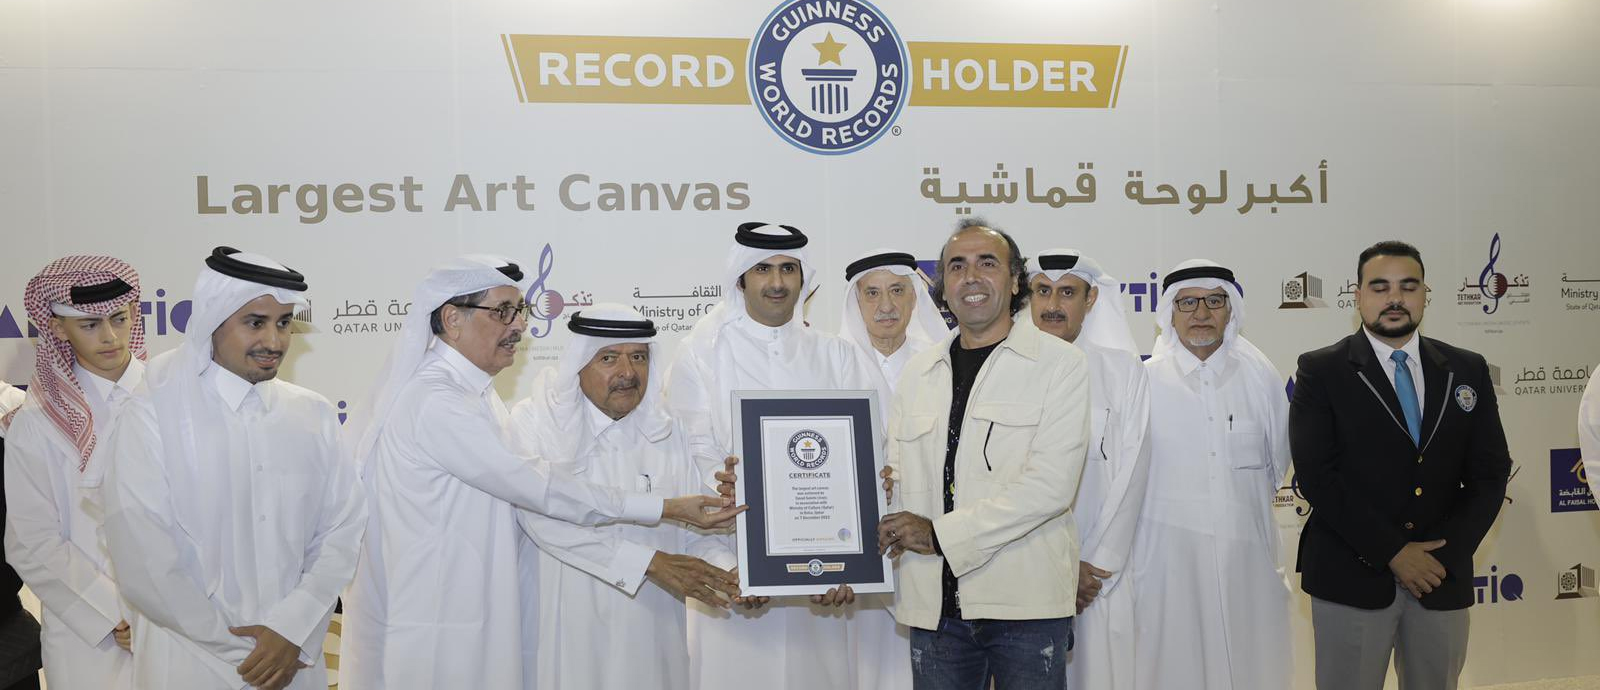 Minister of Culture Inaugurates Guinness World Records' Largest Painting 'The Story of a Ball'